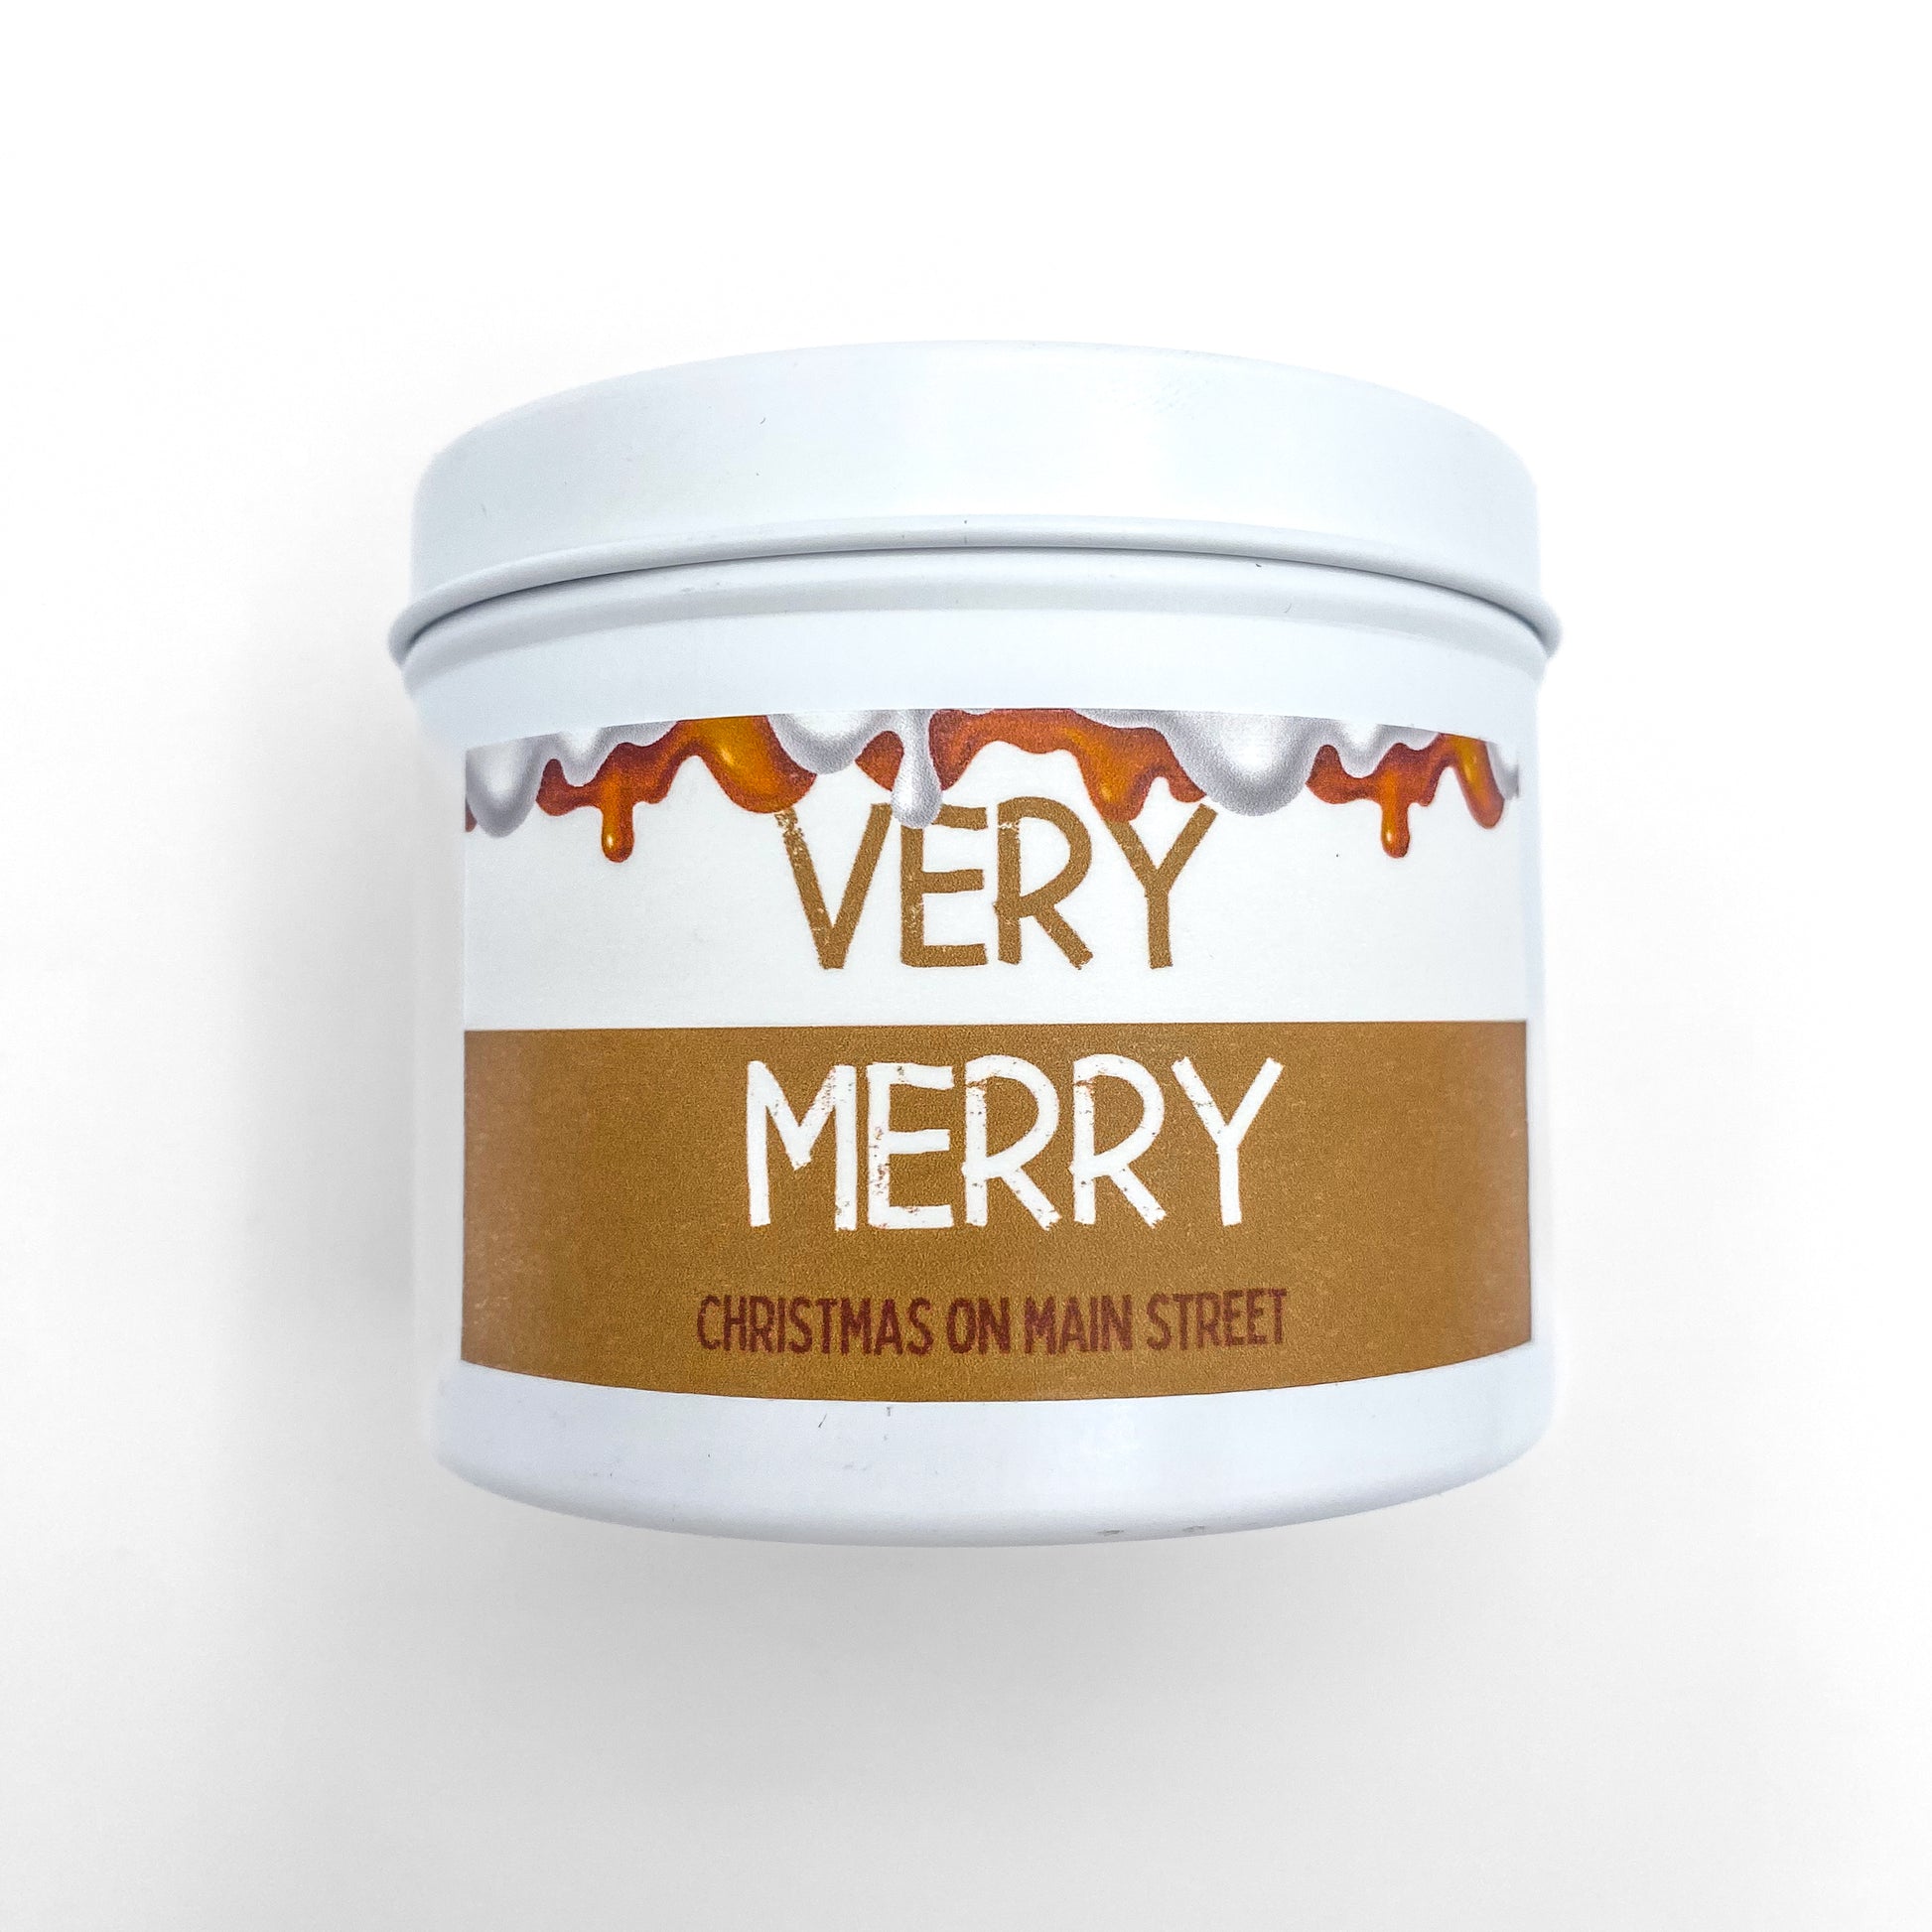 "Very Merry" holiday candle in white tin